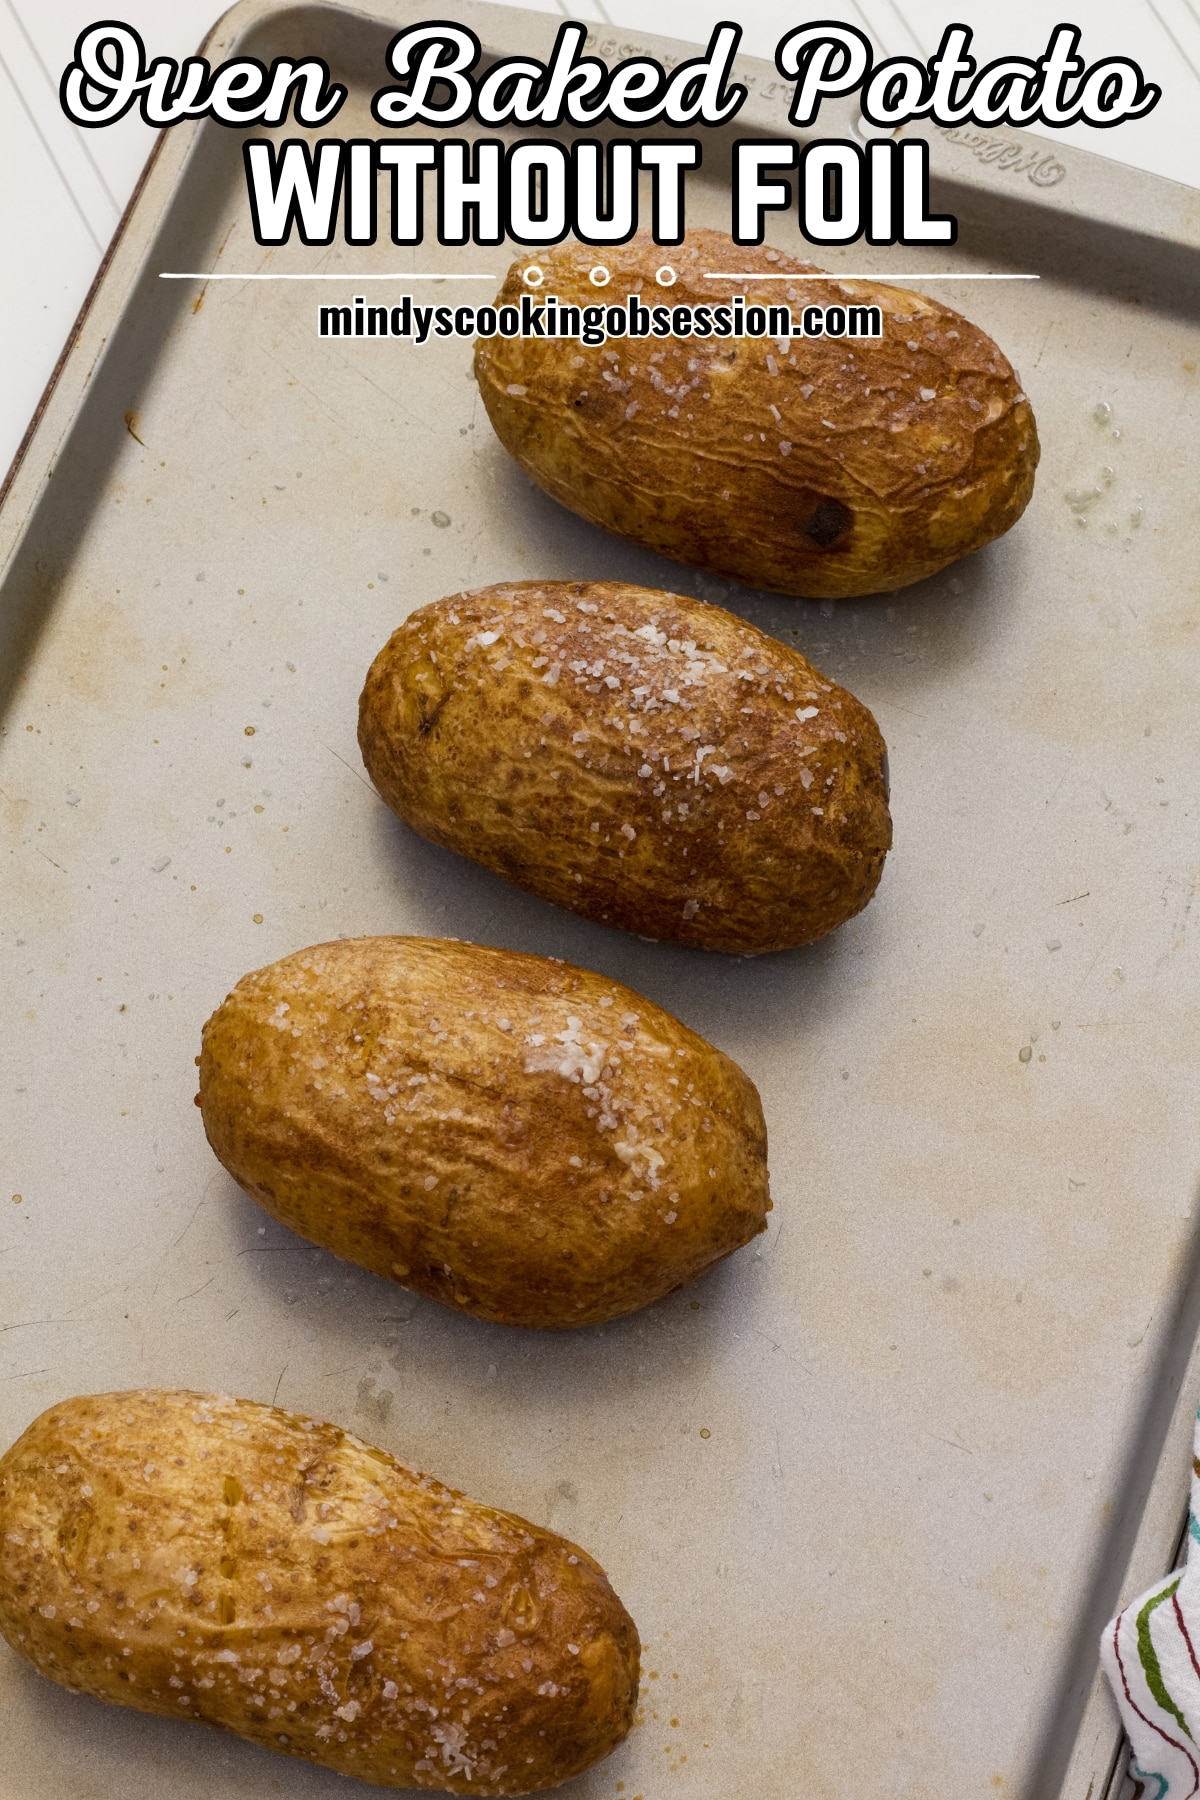 How to Make Perfect Baked Potato in Oven with No Foil - Mindy's